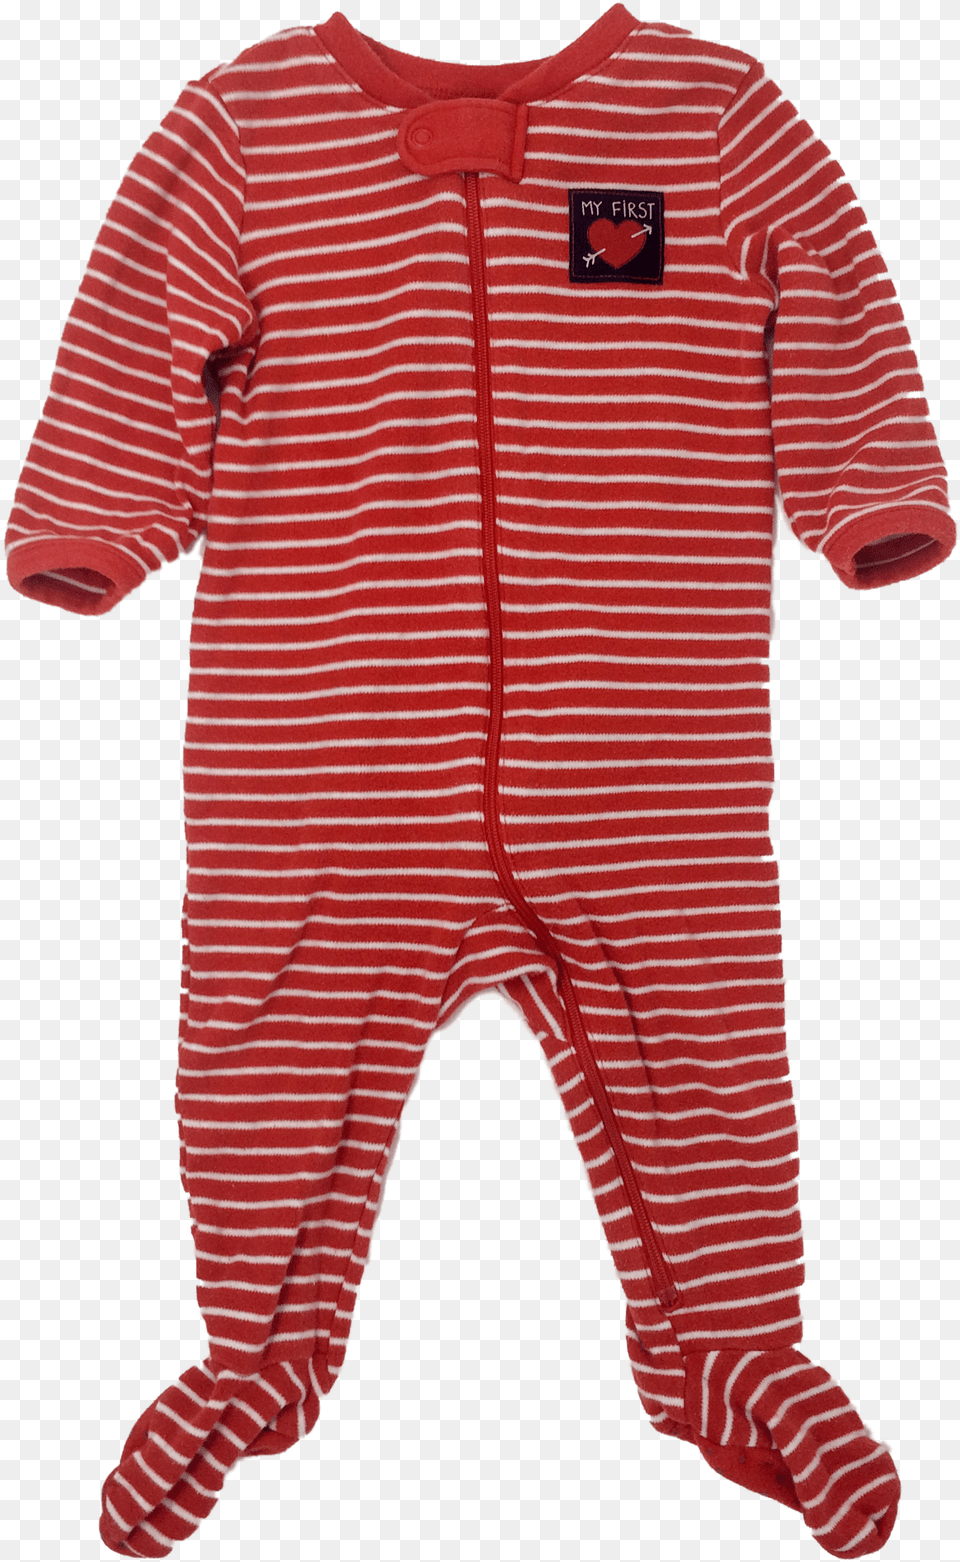 Resterds Mssa, Clothing, Pajamas, Baby, Person Png